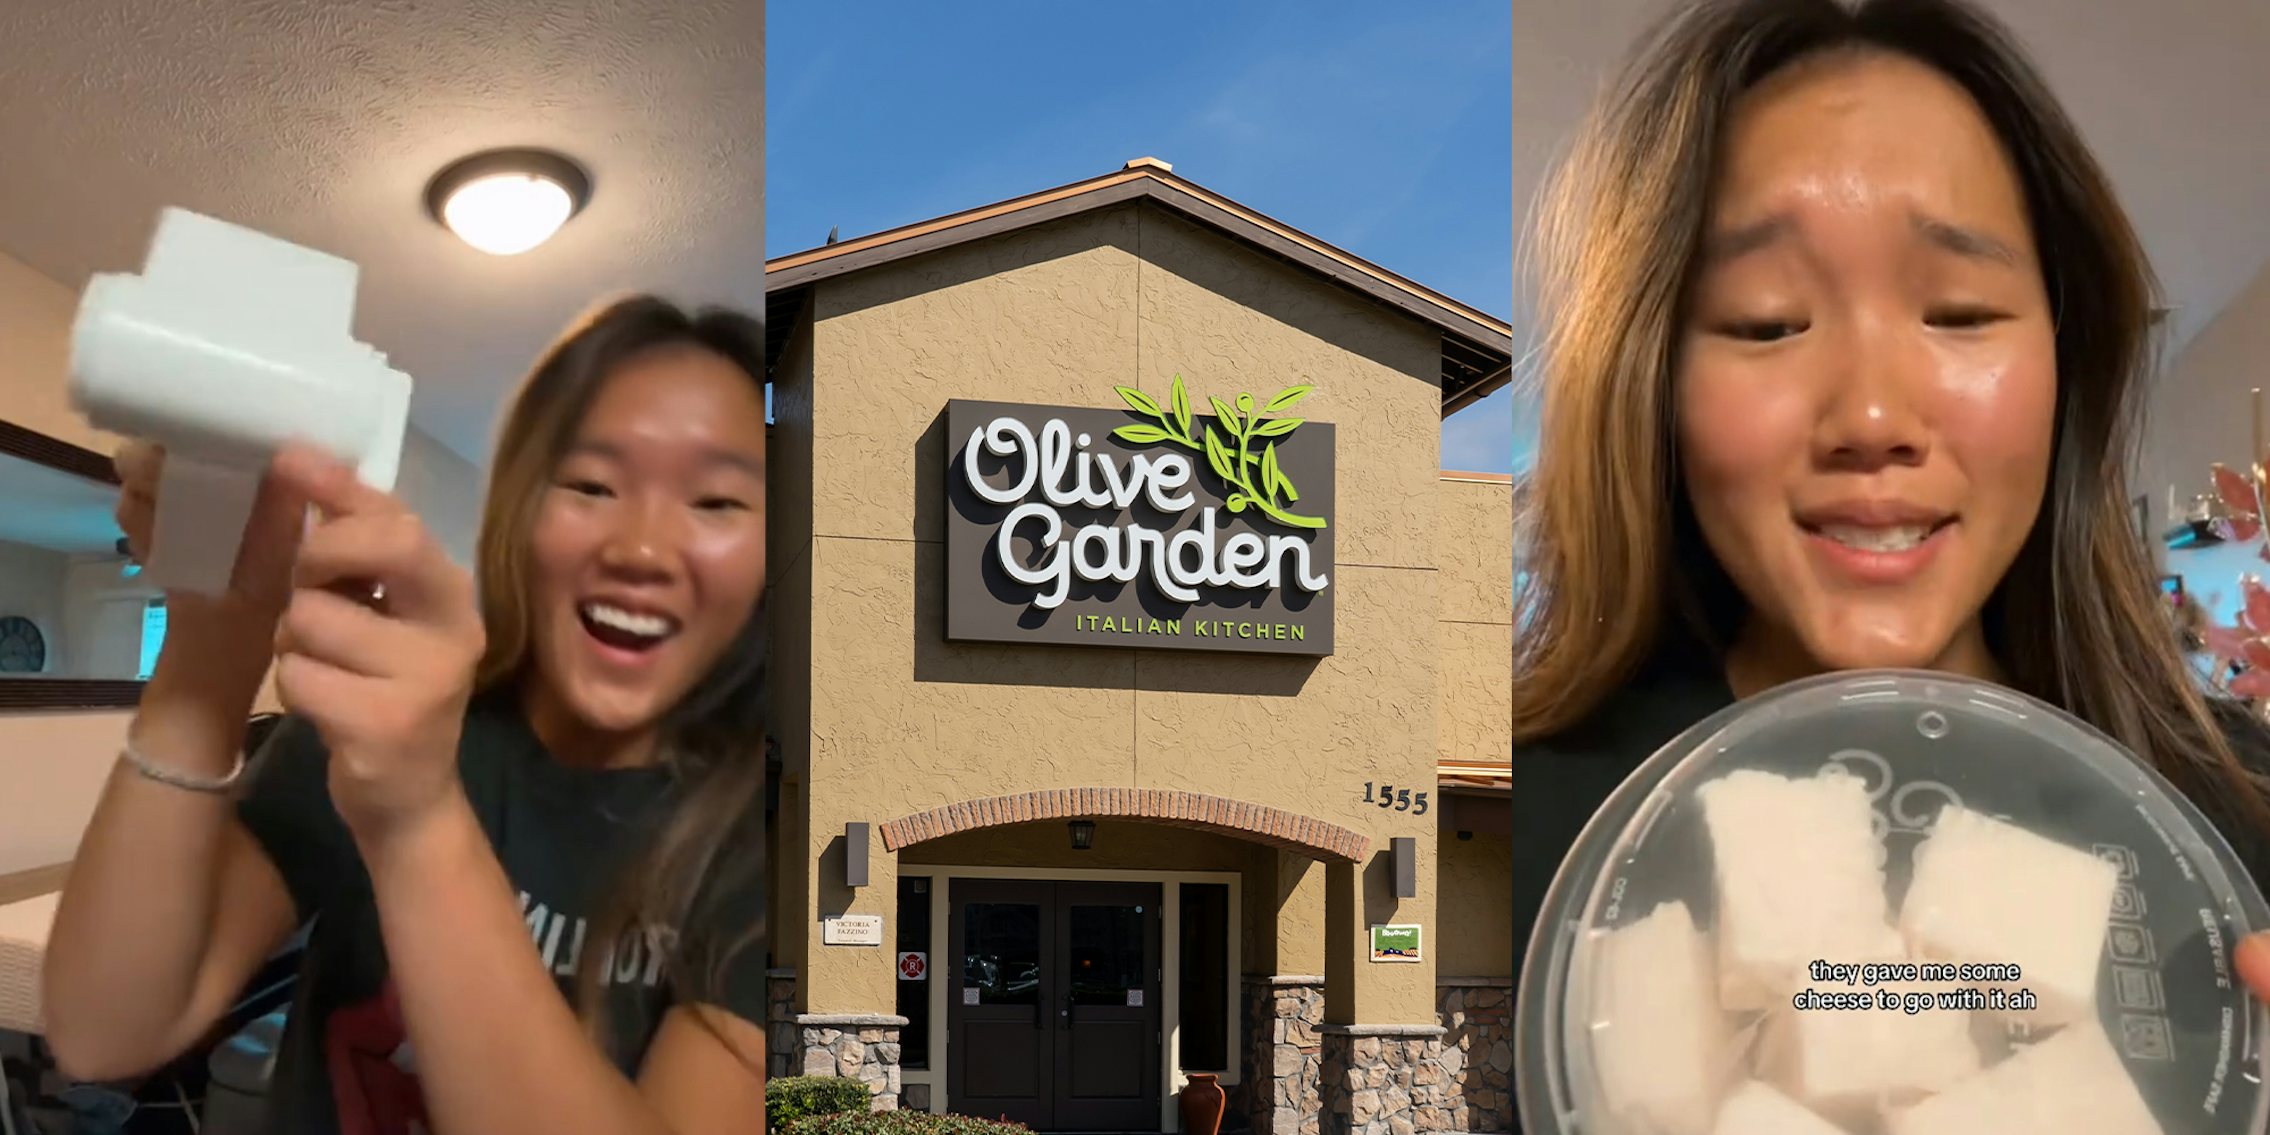 Olive Garden customer goes in for never-ending pasta and discovers you can take home a cheese grater